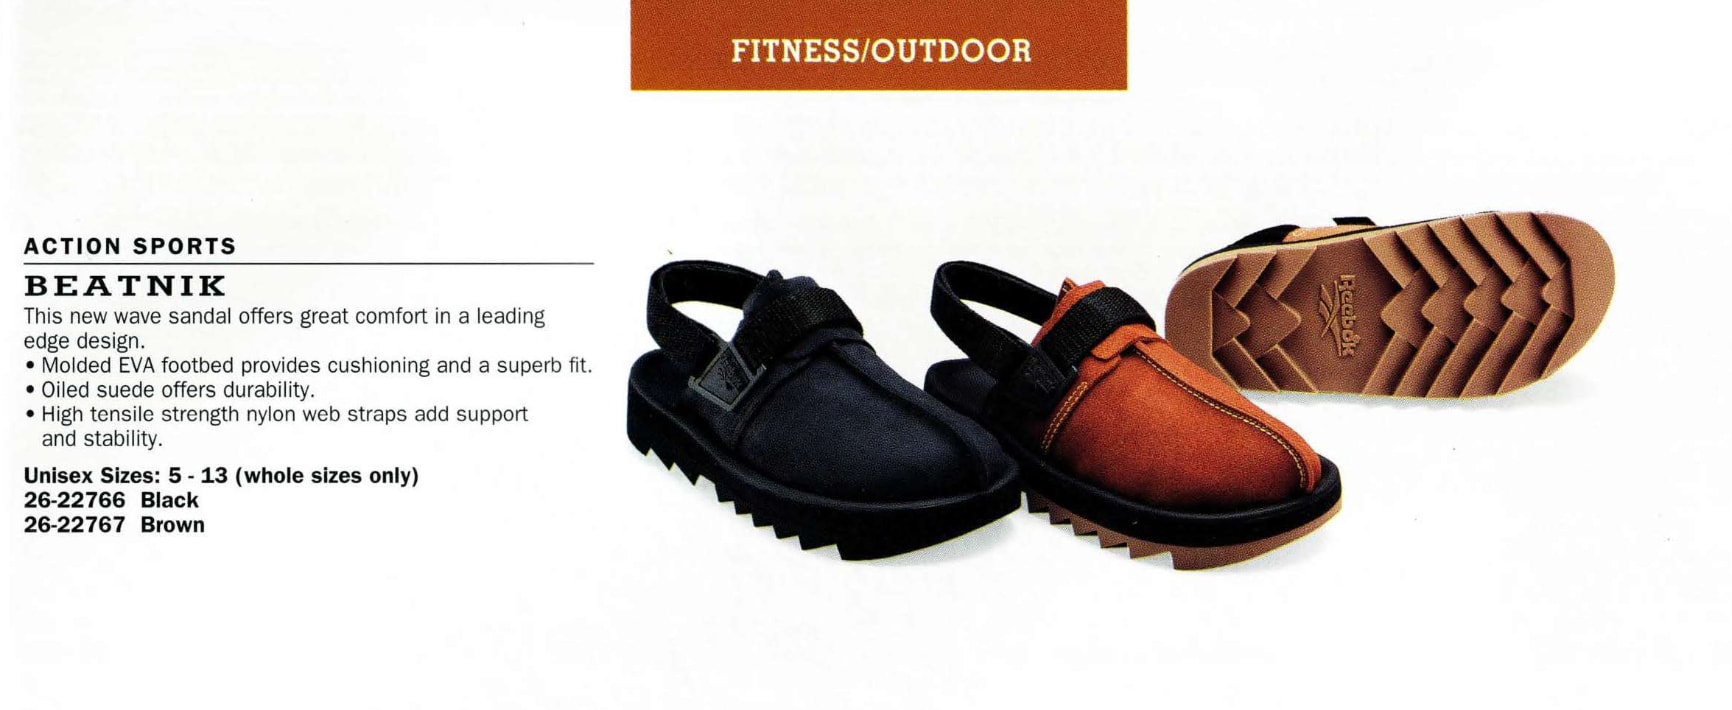 How Reebok's Beatnik Sandals Became a Hit 26 Years Later | Complex